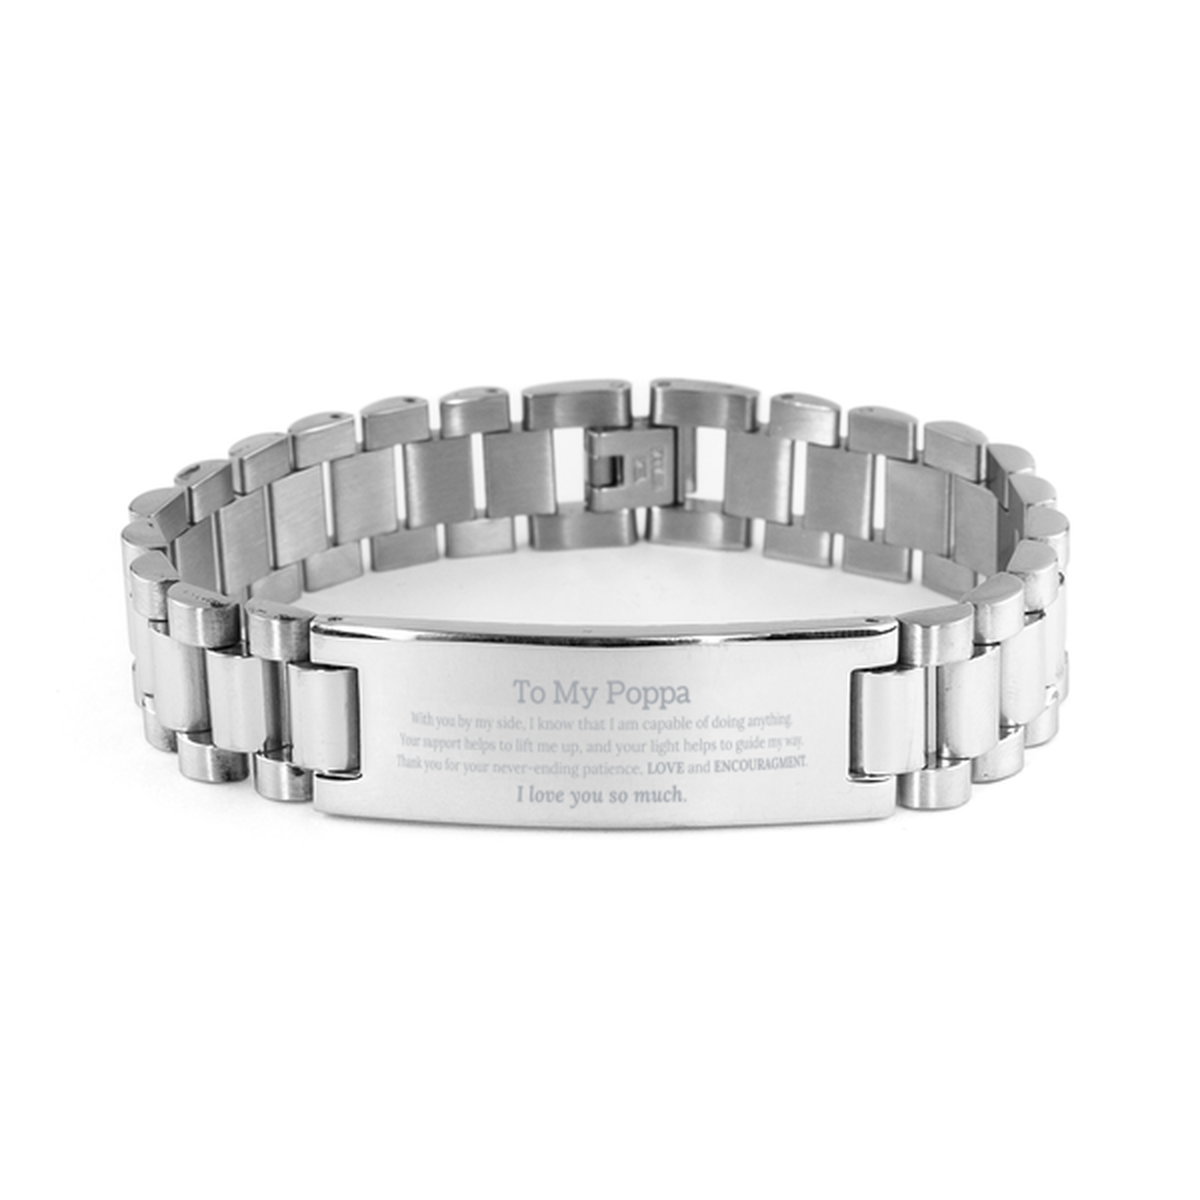 Appreciation Poppa Ladder Stainless Steel Bracelet Gifts, To My Poppa Birthday Christmas Wedding Keepsake Gifts for Poppa With you by my side, I know that I am capable of doing anything. I love you so much